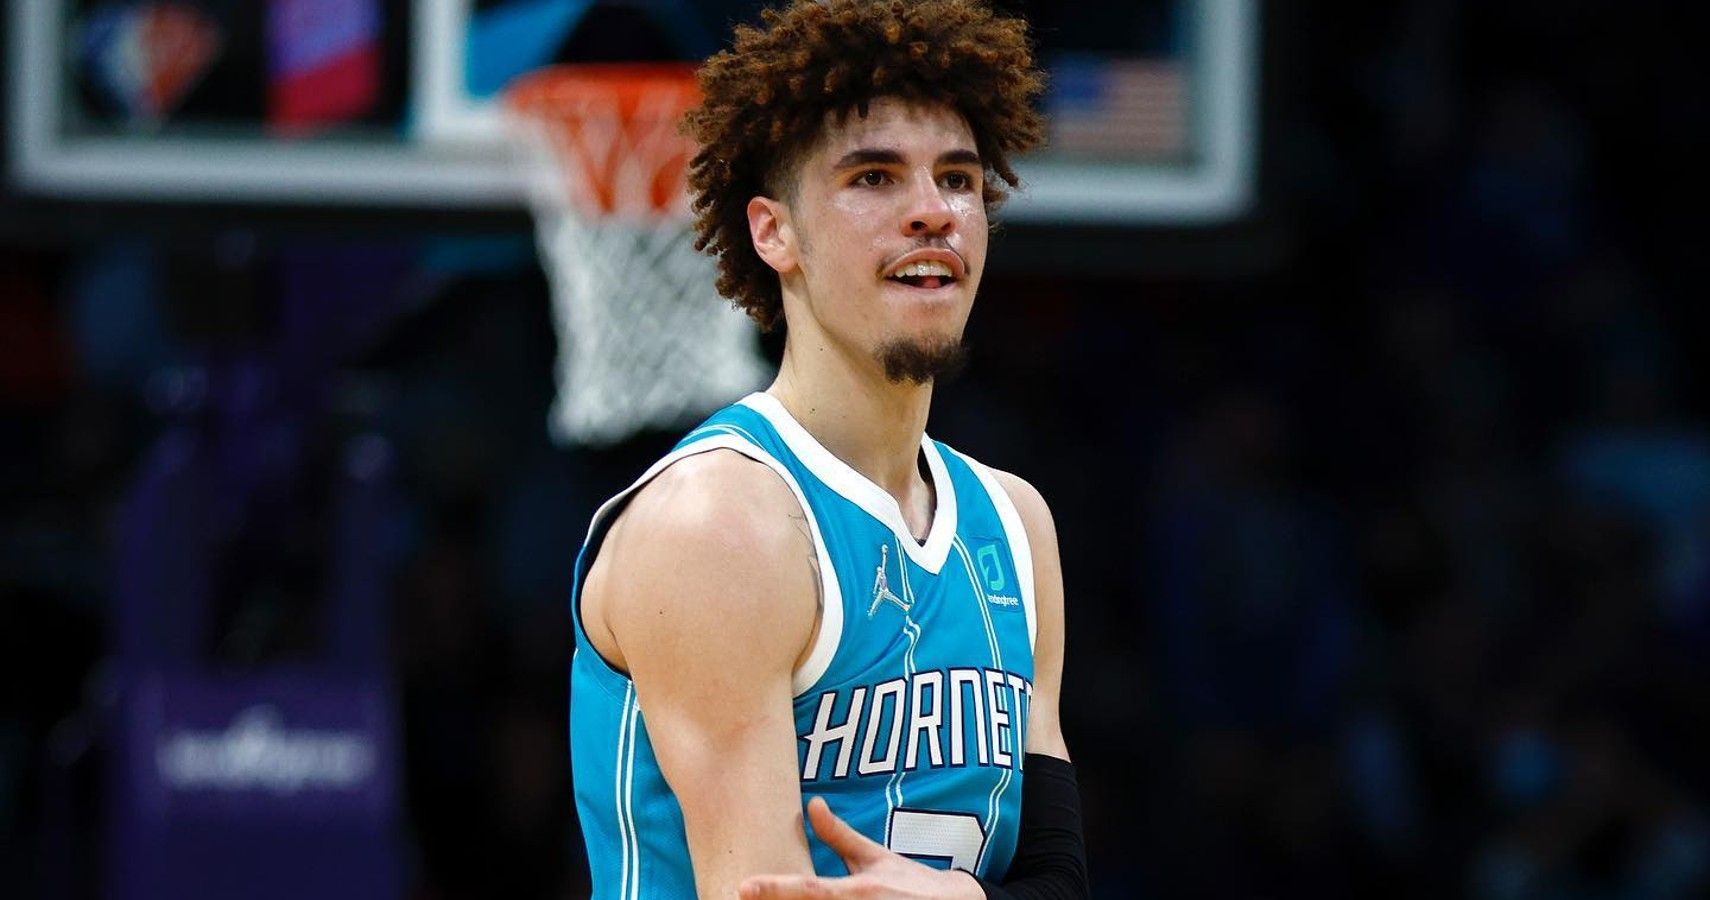 Hornets Player, Lamelo Ball, Sued By A Publicist For $10 Million Over A ...